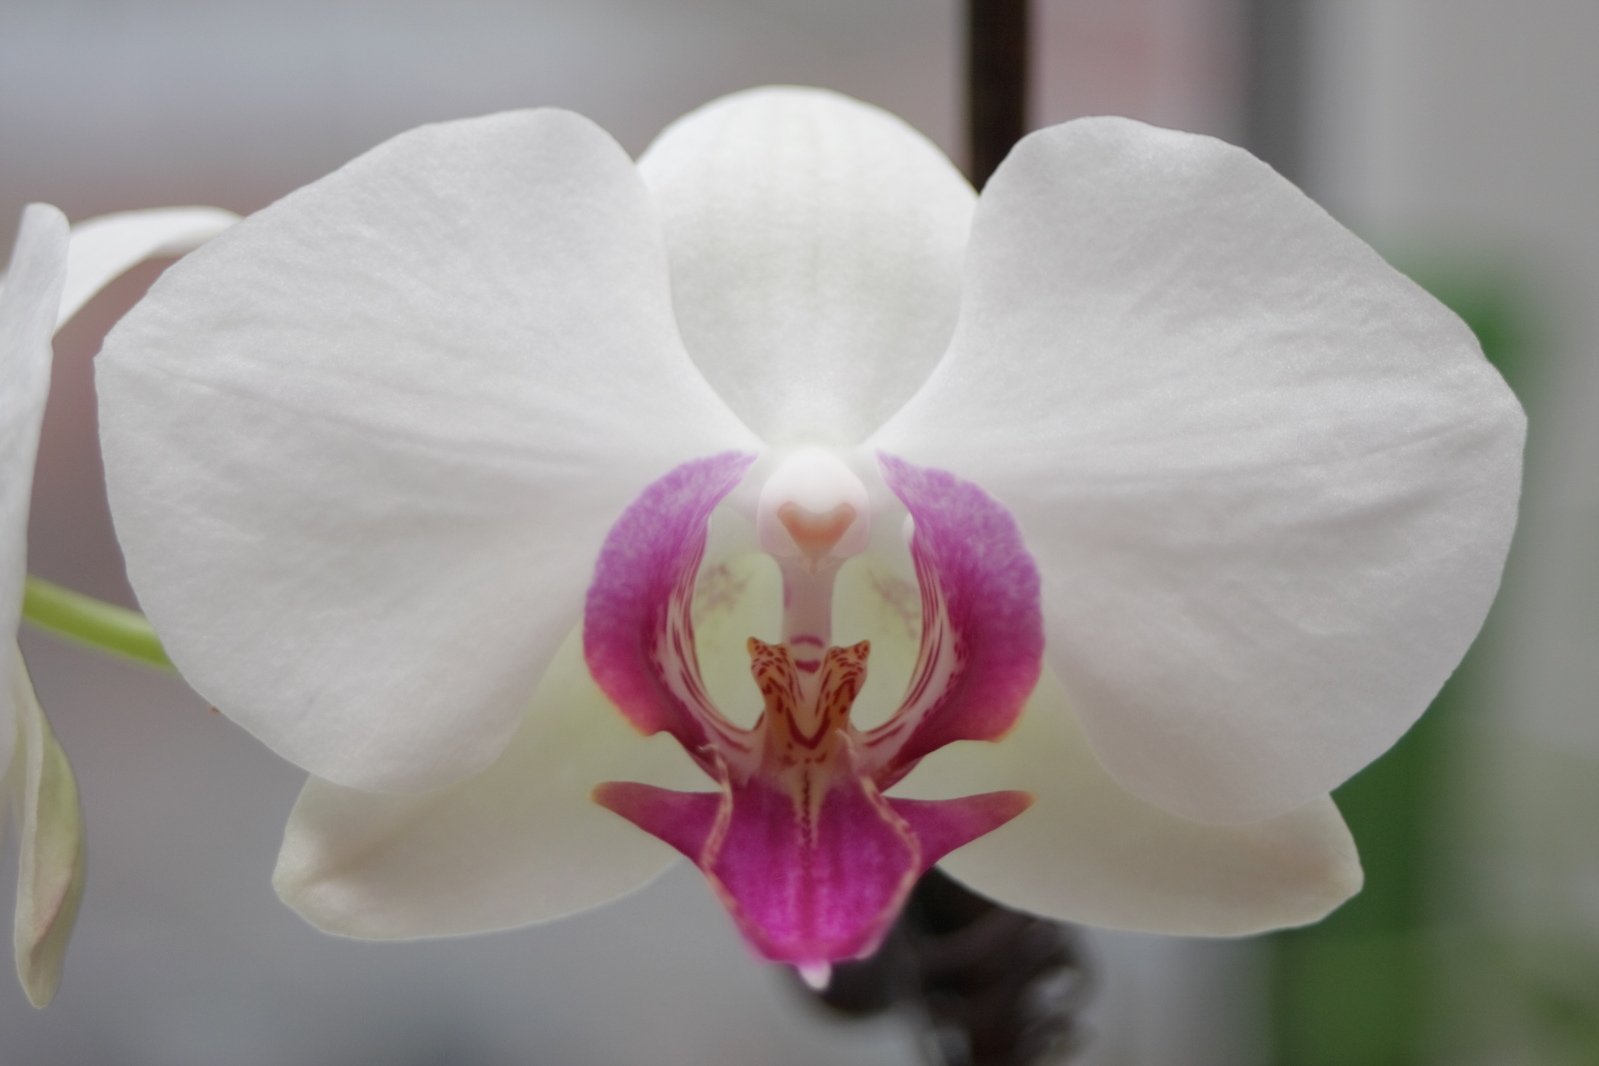 the blooming purple and white orchid is very delicate